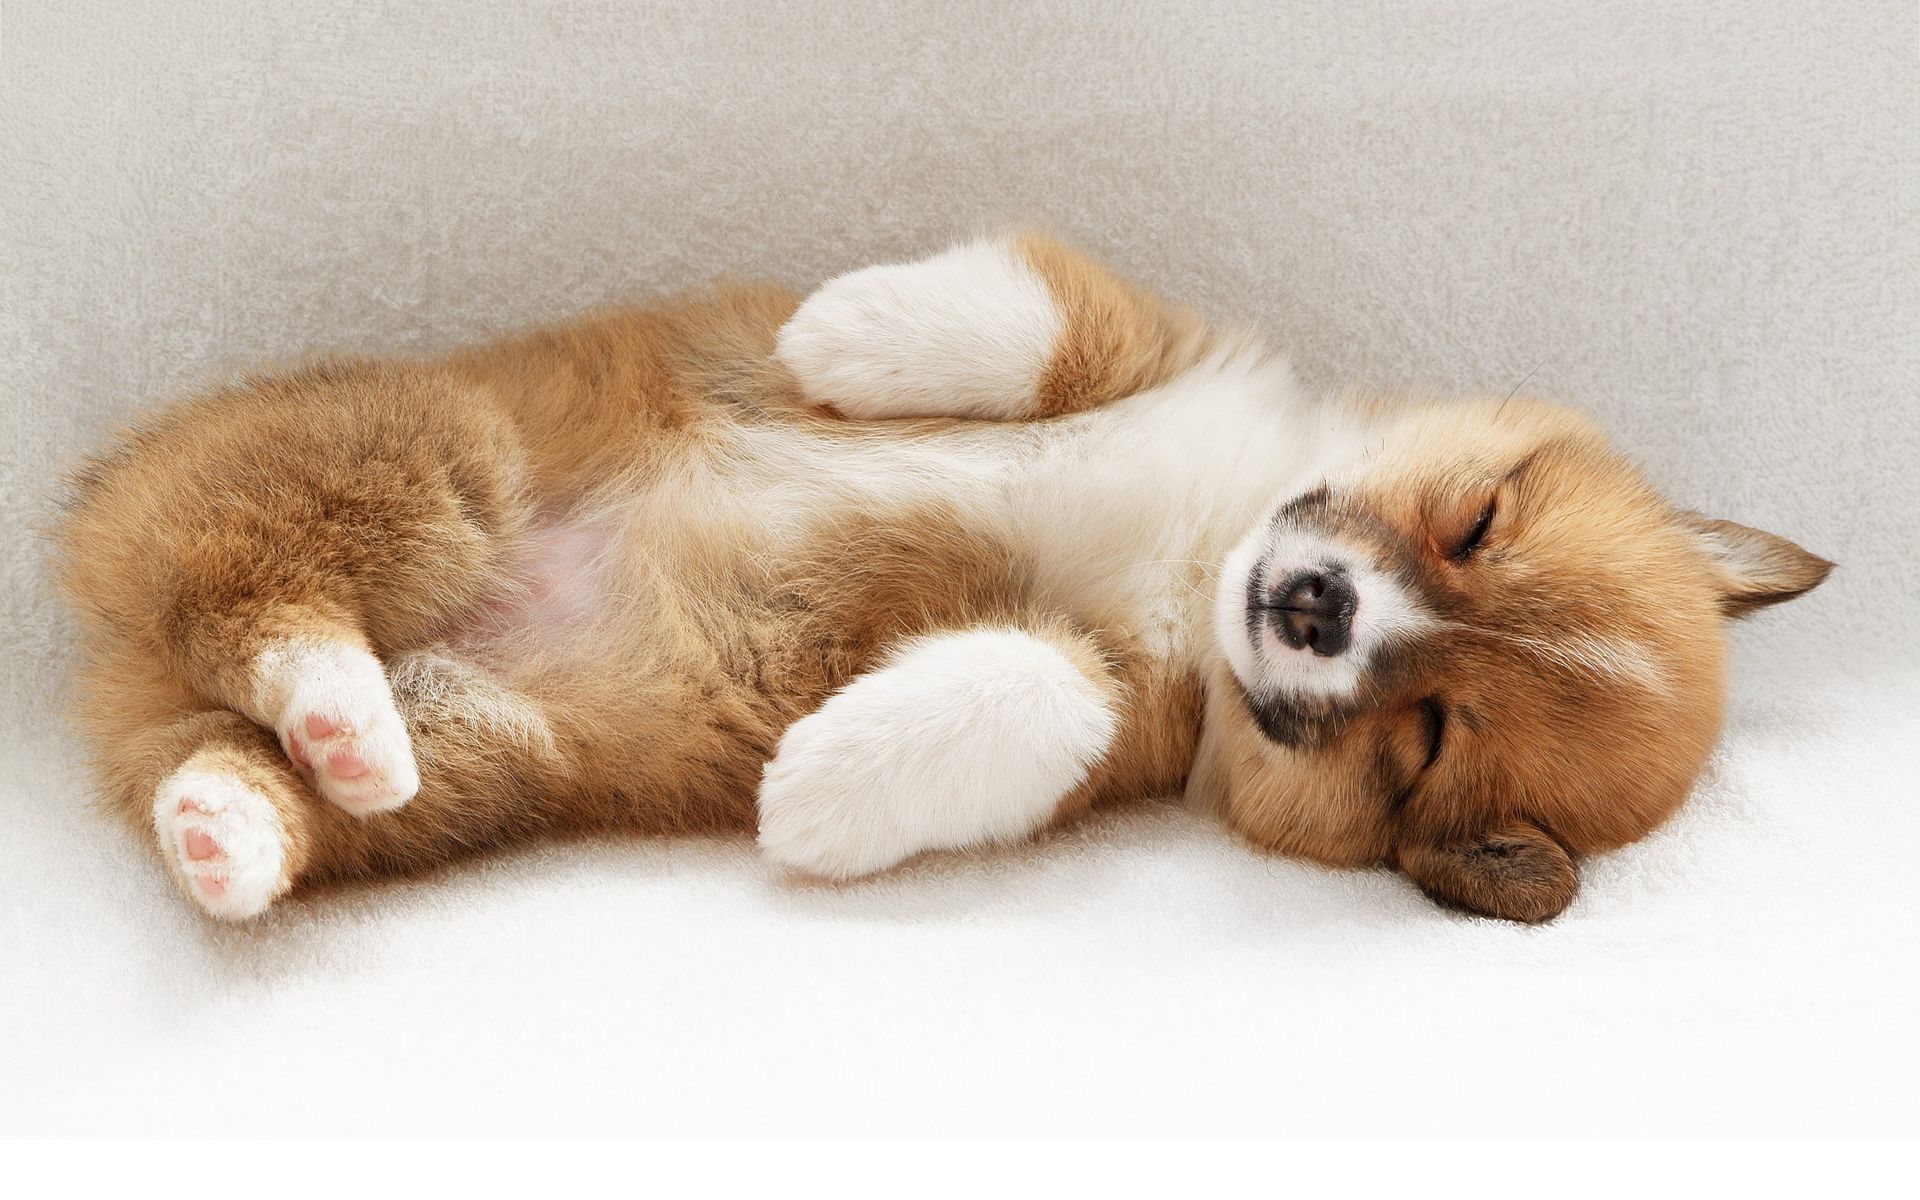 Free download cute dog picture Cute puppy sleep Wallpaper